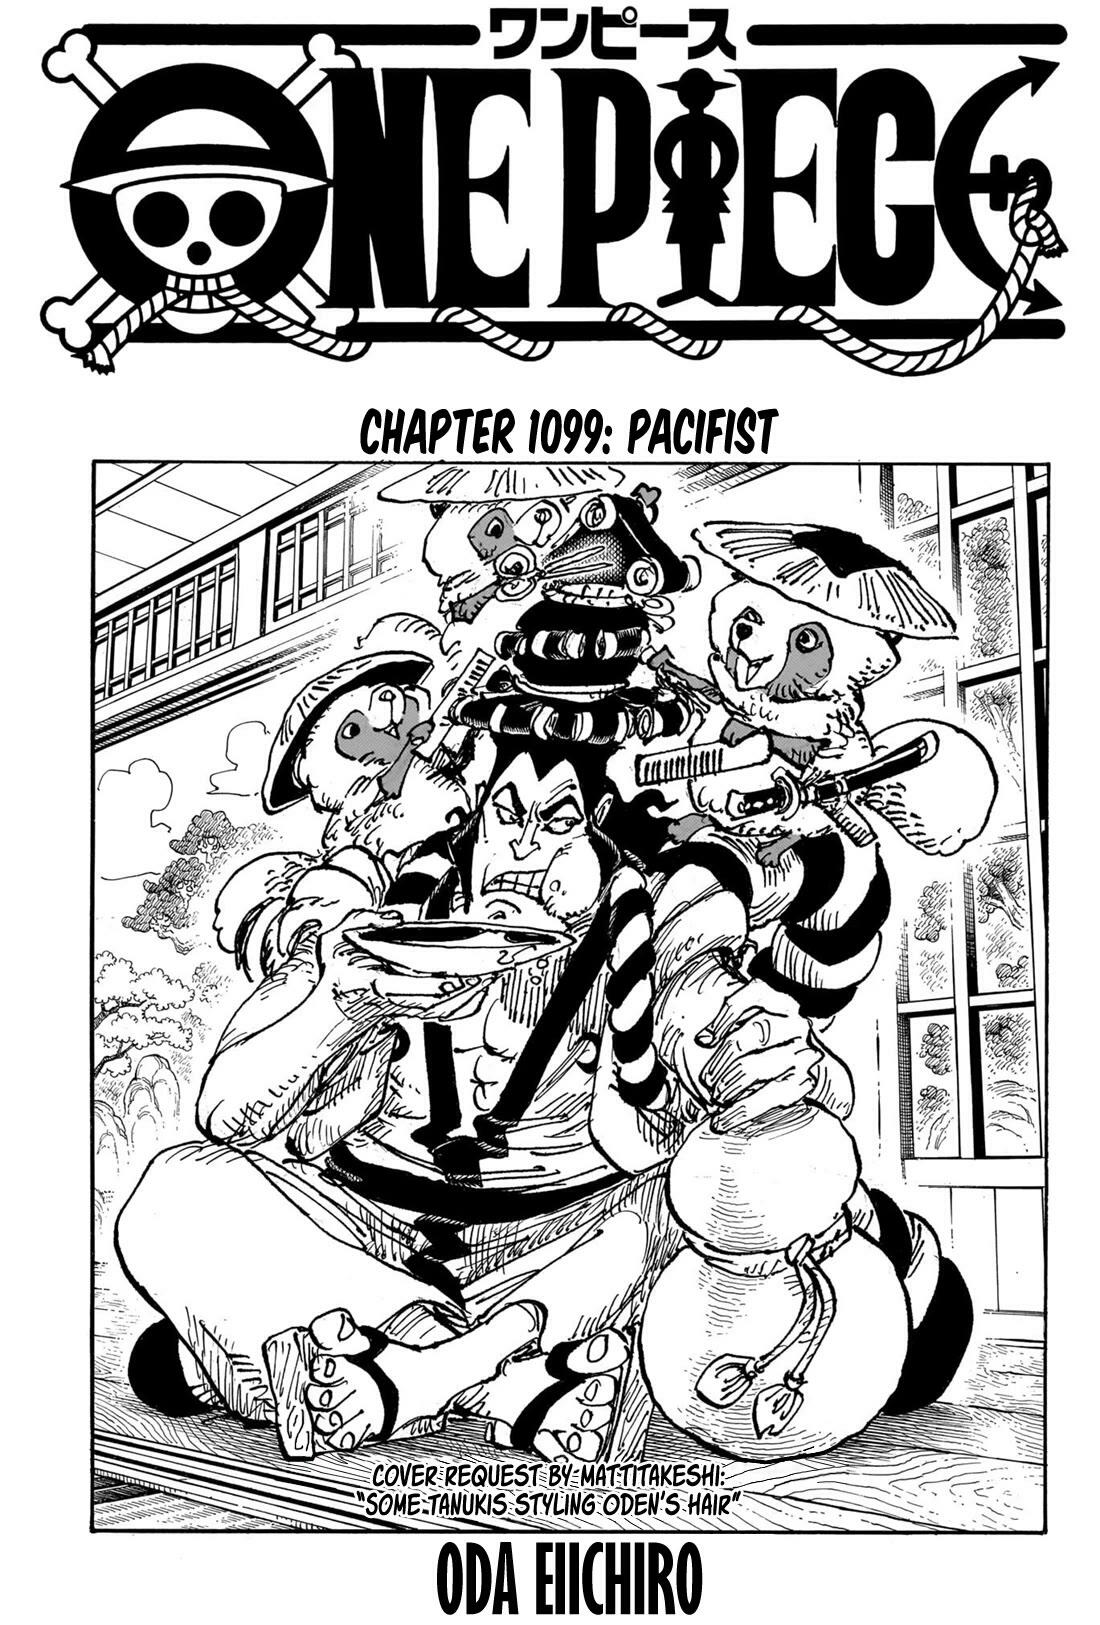 Spoiler - One Piece Chapter 997 Spoiler Summaries and Images